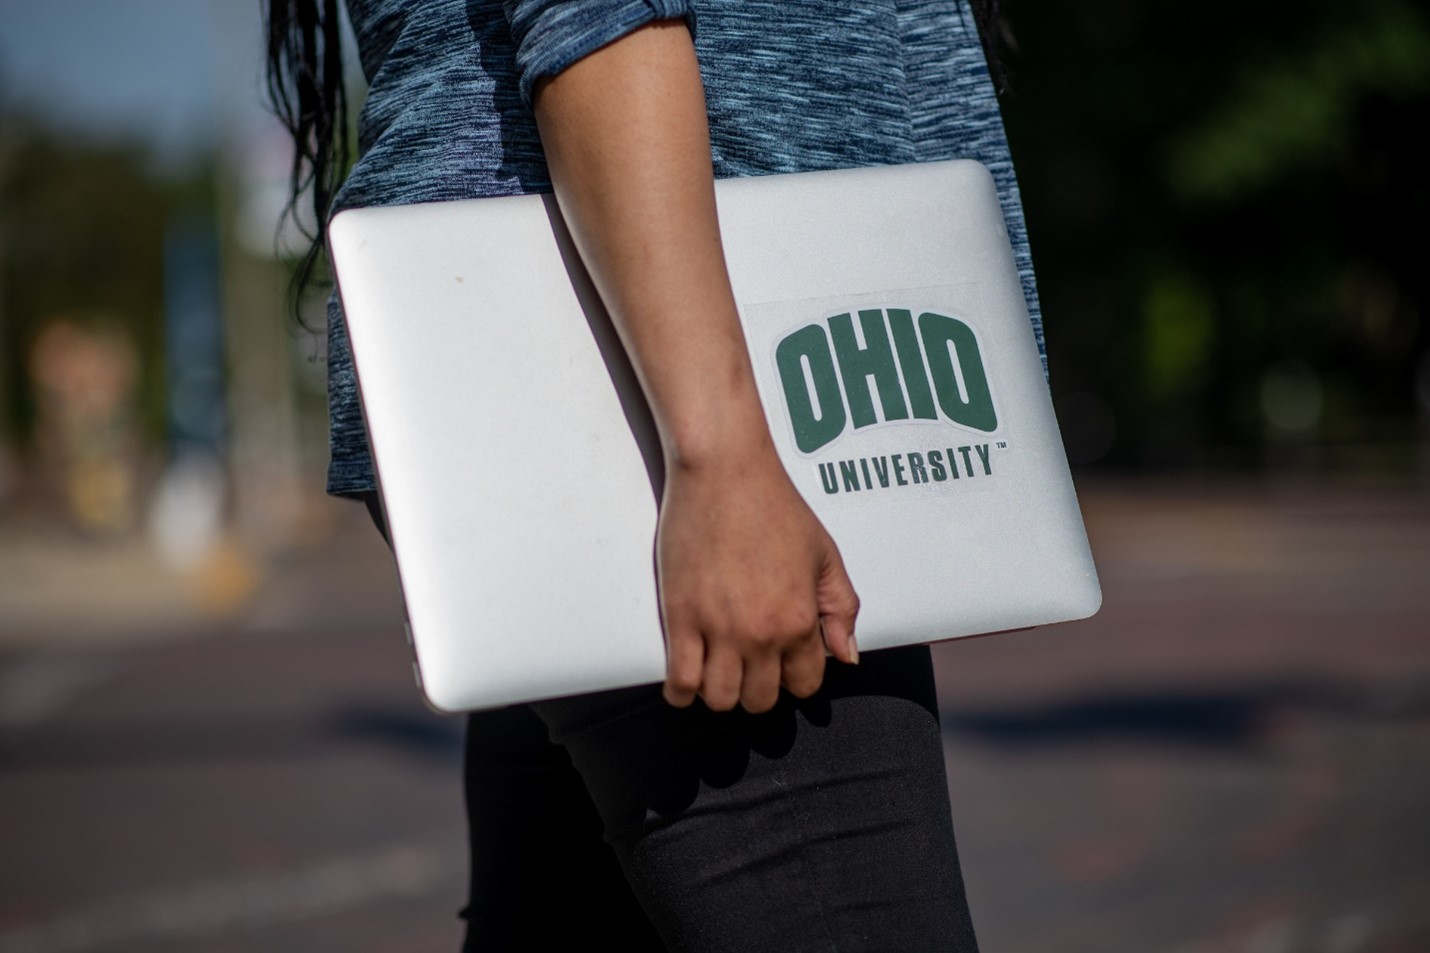 Person carrying a laptop with an Ohio University sticker on it